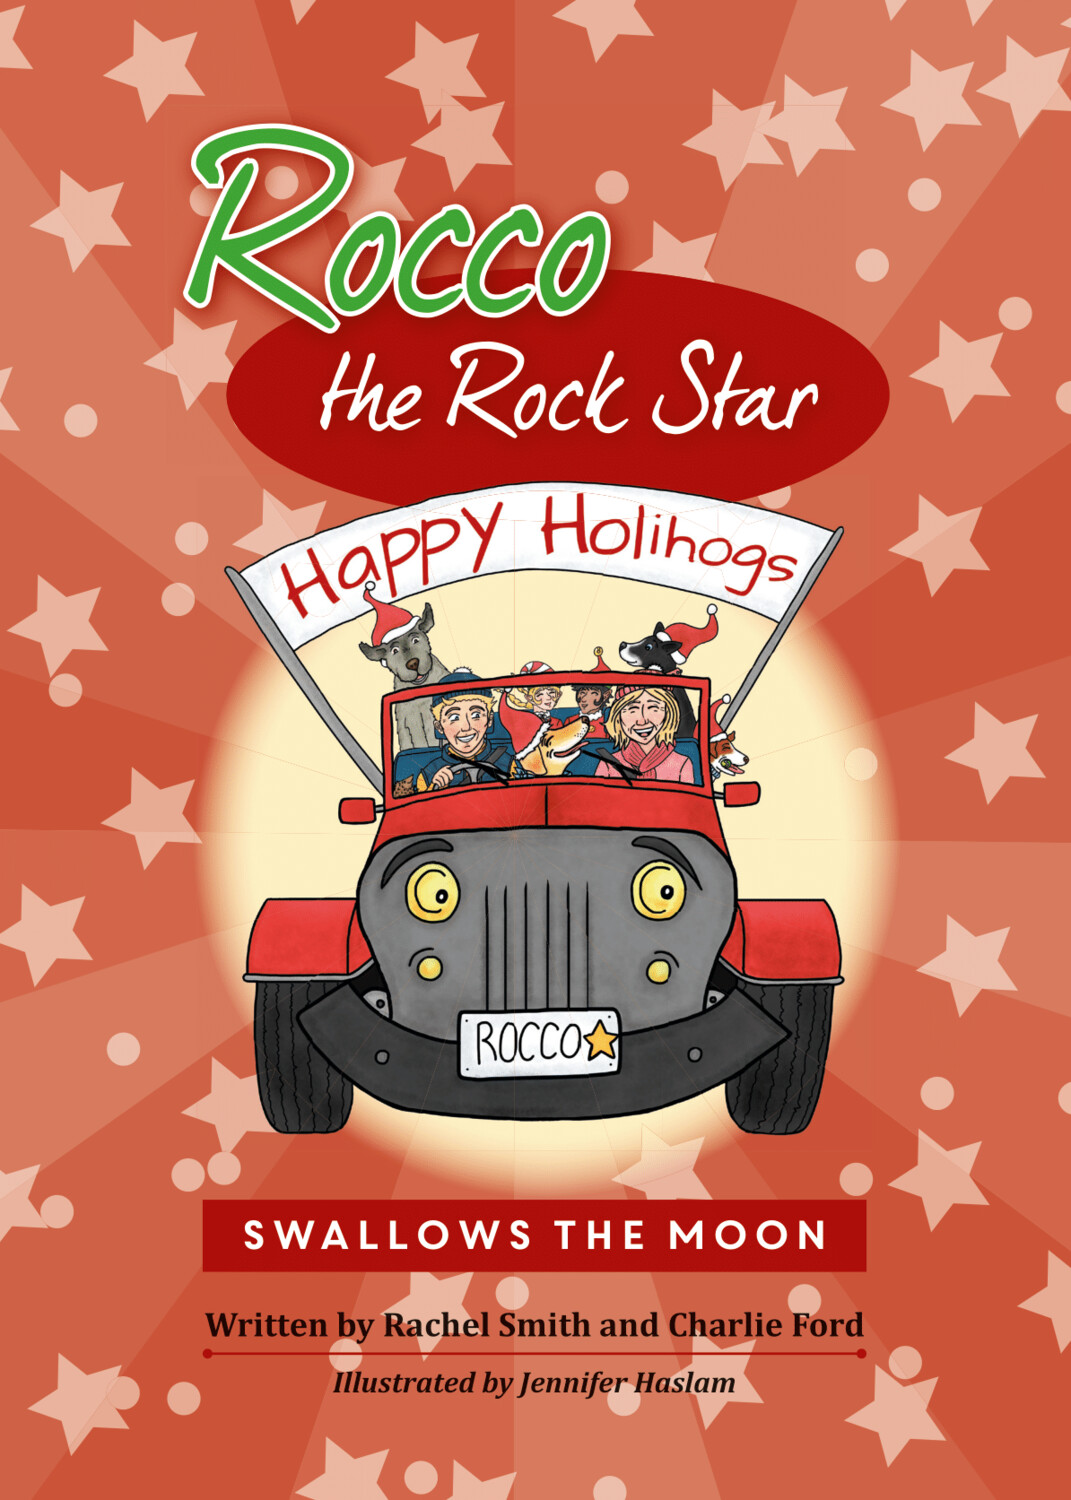 SWALLOWS THE MOON - CHILDREN'S BOOK - ROCCO